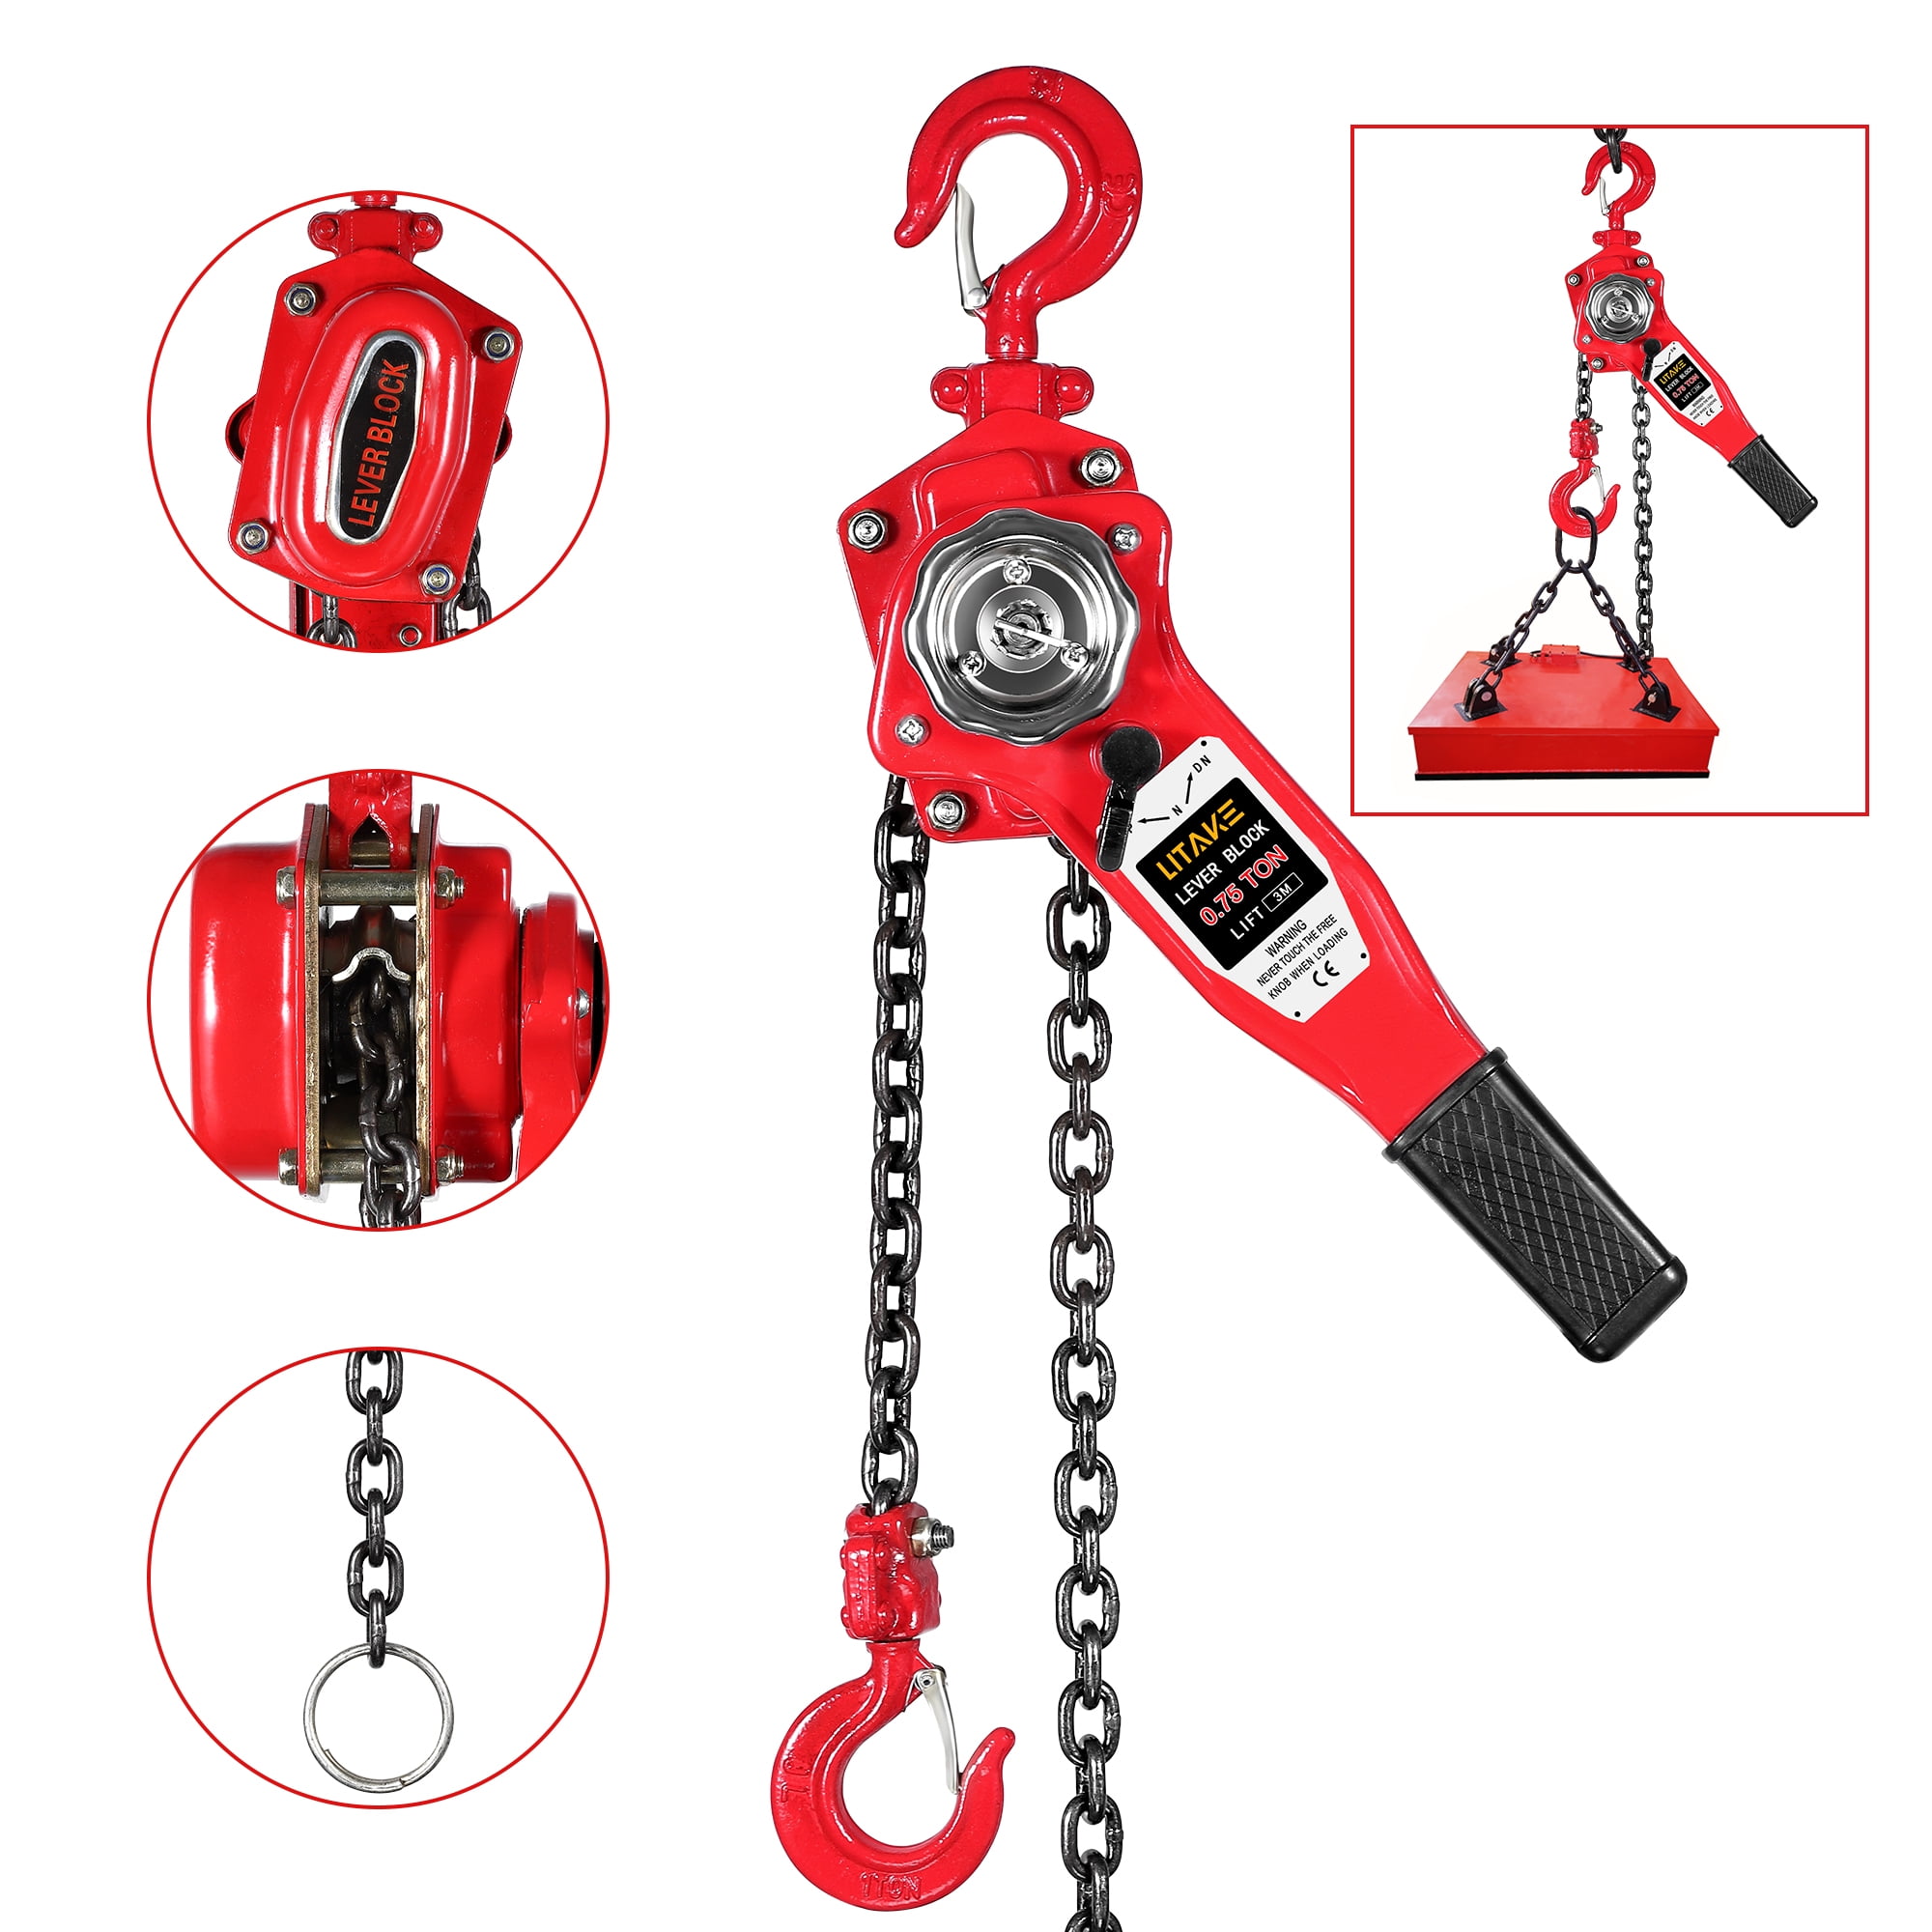 IMHERE W U 43mm Swivel Double Pulley Sheave Rigging Metal Lift Hoist Rope Hanging Lifting Wheel Zinc Alloy Pulley Groove 